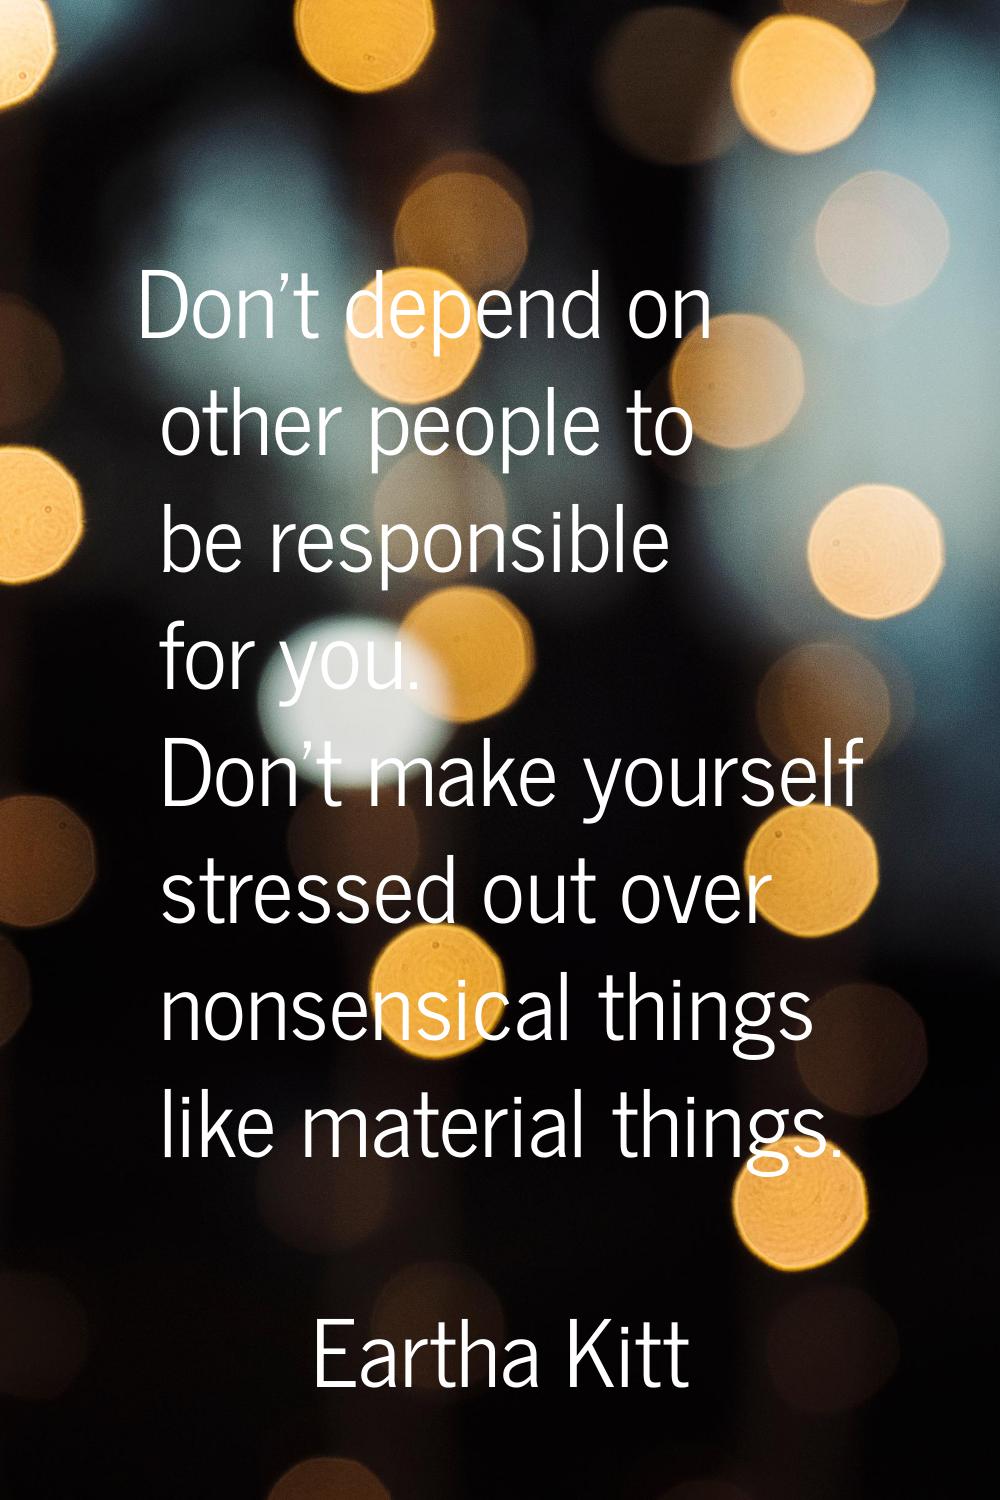 Don't depend on other people to be responsible for you. Don't make yourself stressed out over nonse